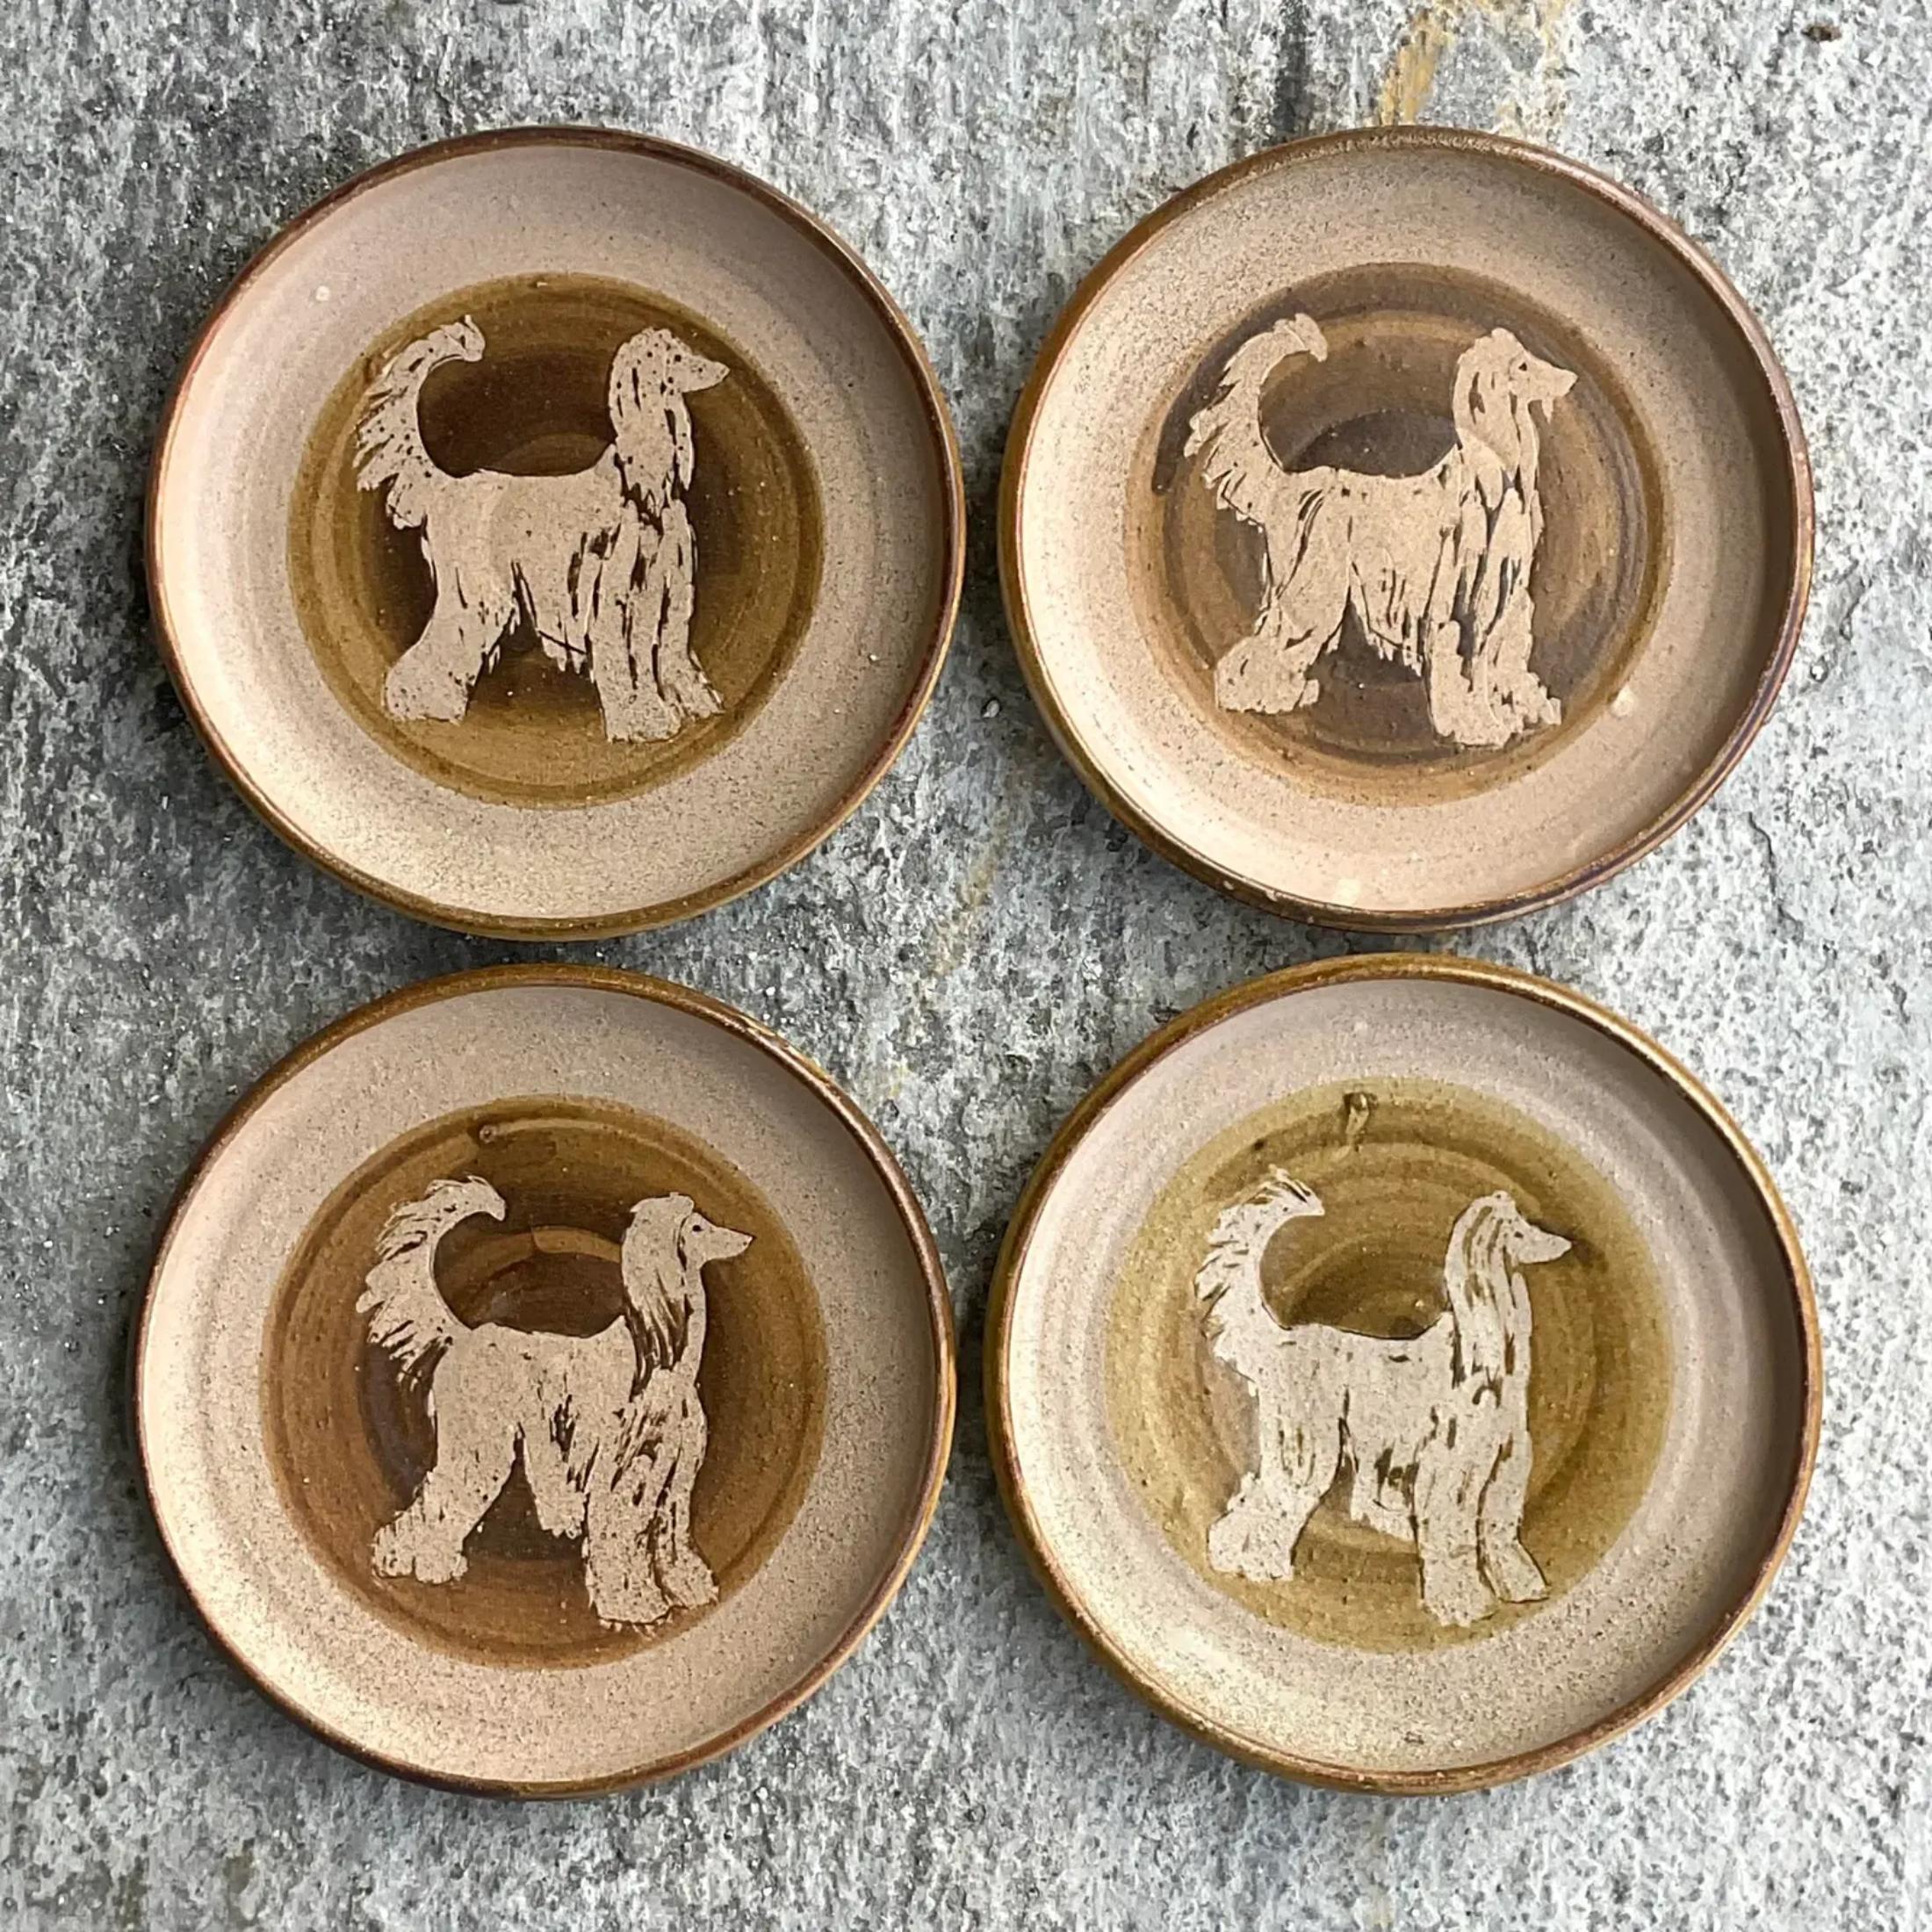 20th Century Vintage Boho Signed Studio Pottery Plates With Afghan Dogs - Set of 4 For Sale